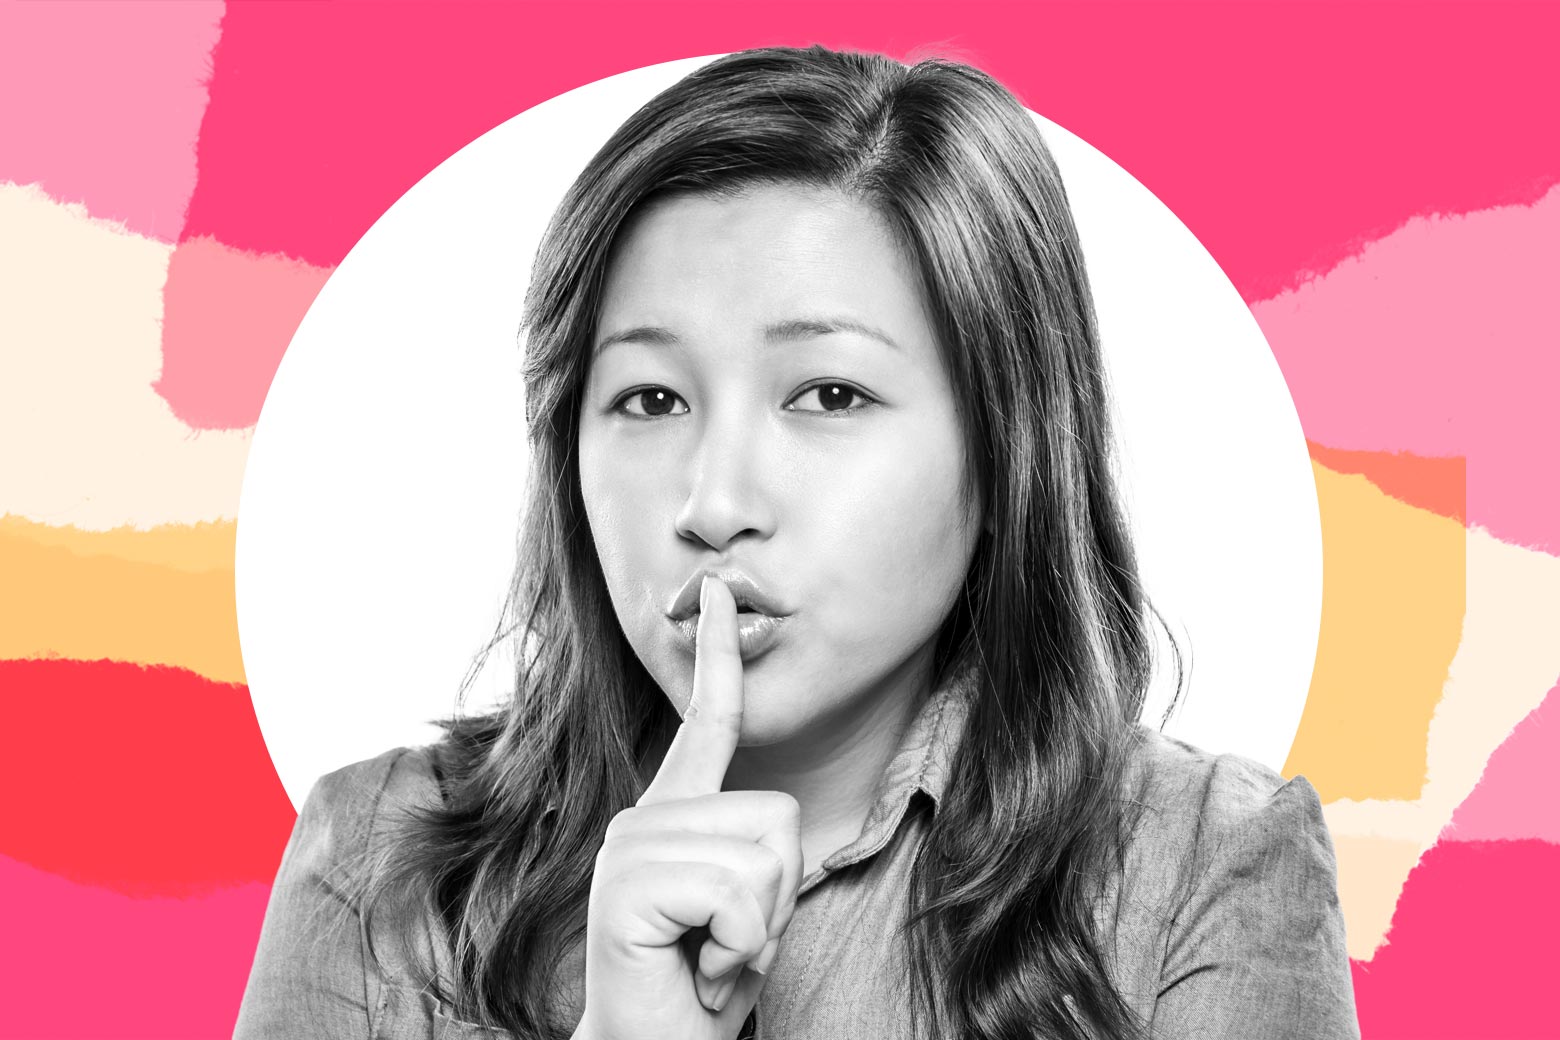 A woman makes the shhhh symbol with her finger, indicating a secret.